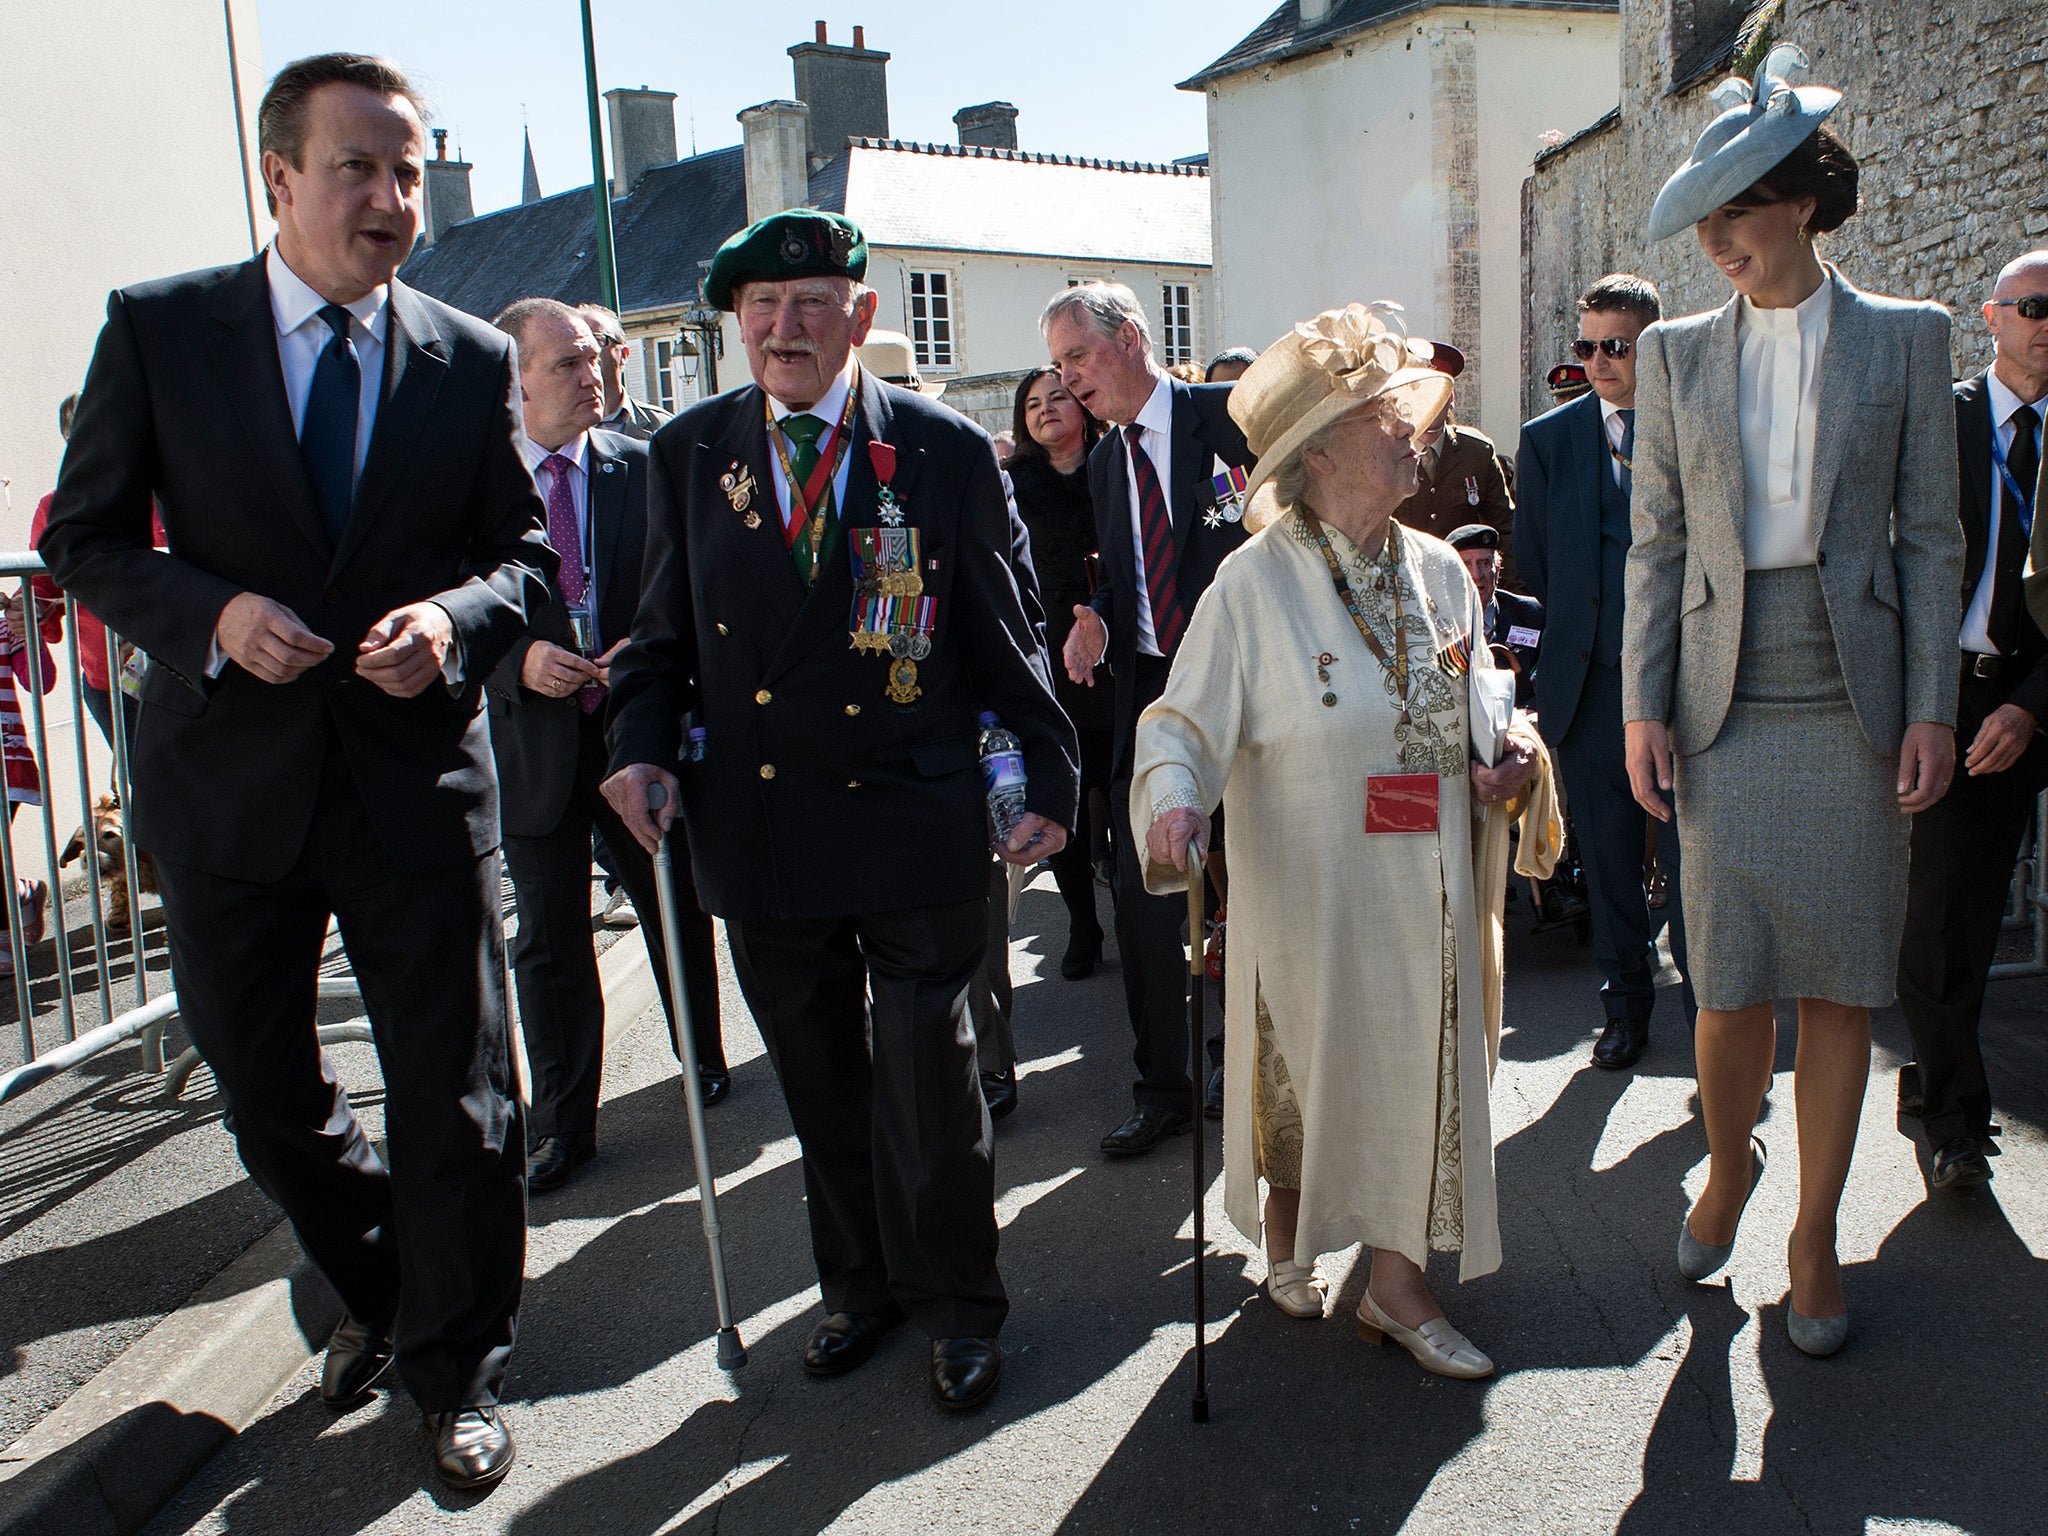 Prime Minister David Cameron and Samantha Cameron talking with D-Day veteran Patrick Churchill and his wife Karin in Bayeux, France, after Mr Cameron revealed his best moment of the year was visiting the D Day memorials in France with his constituent, Pat